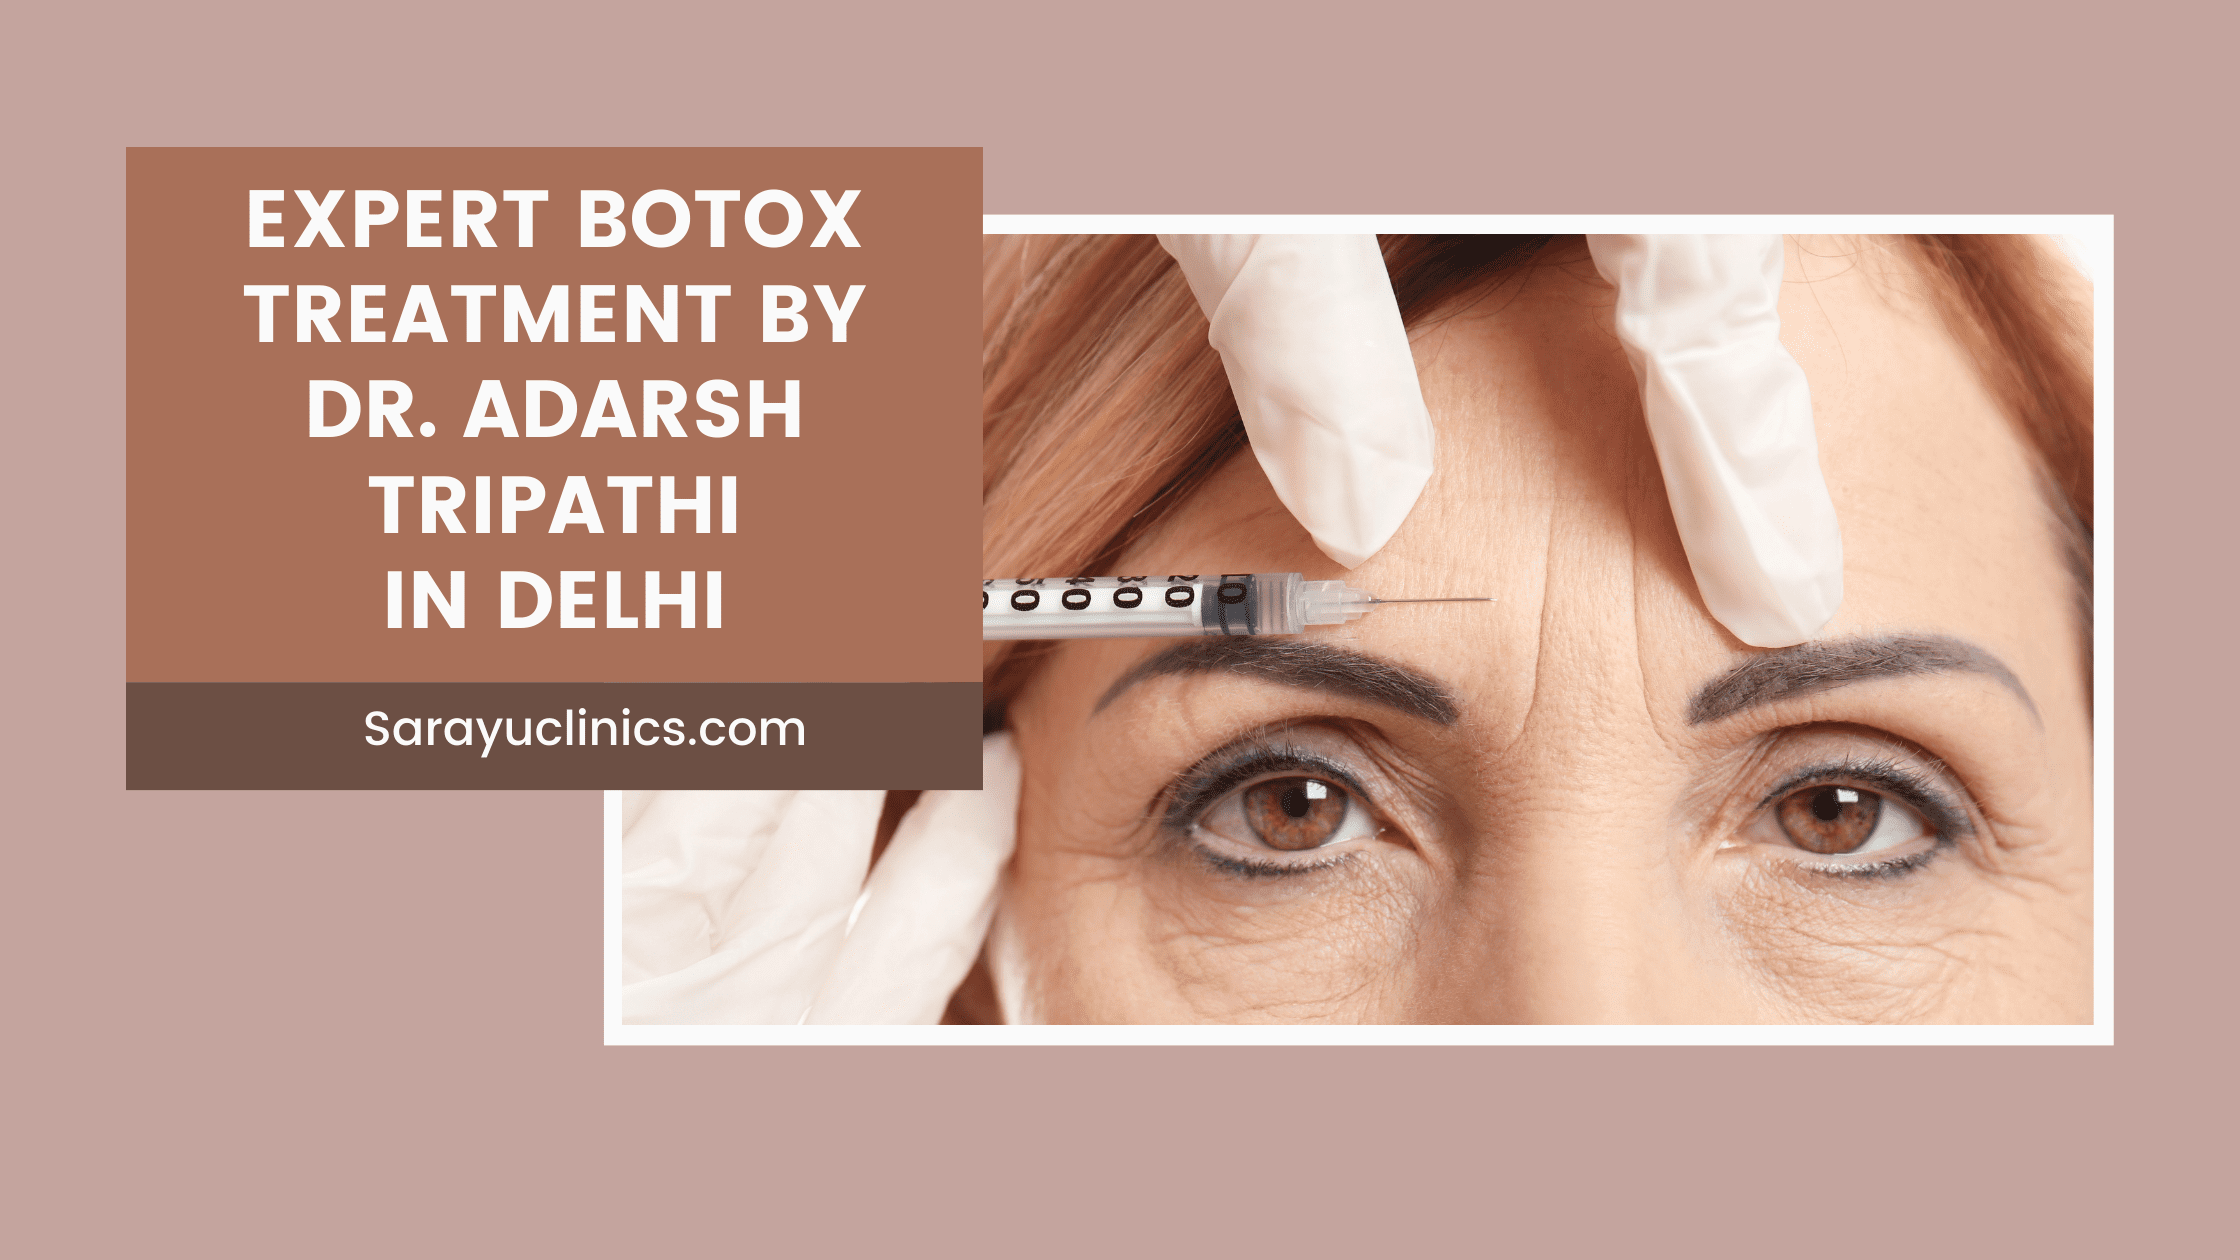 Dr. Adarsh Tripathi, the Best Botox Doctor in Delhi, administering a cosmetic treatment